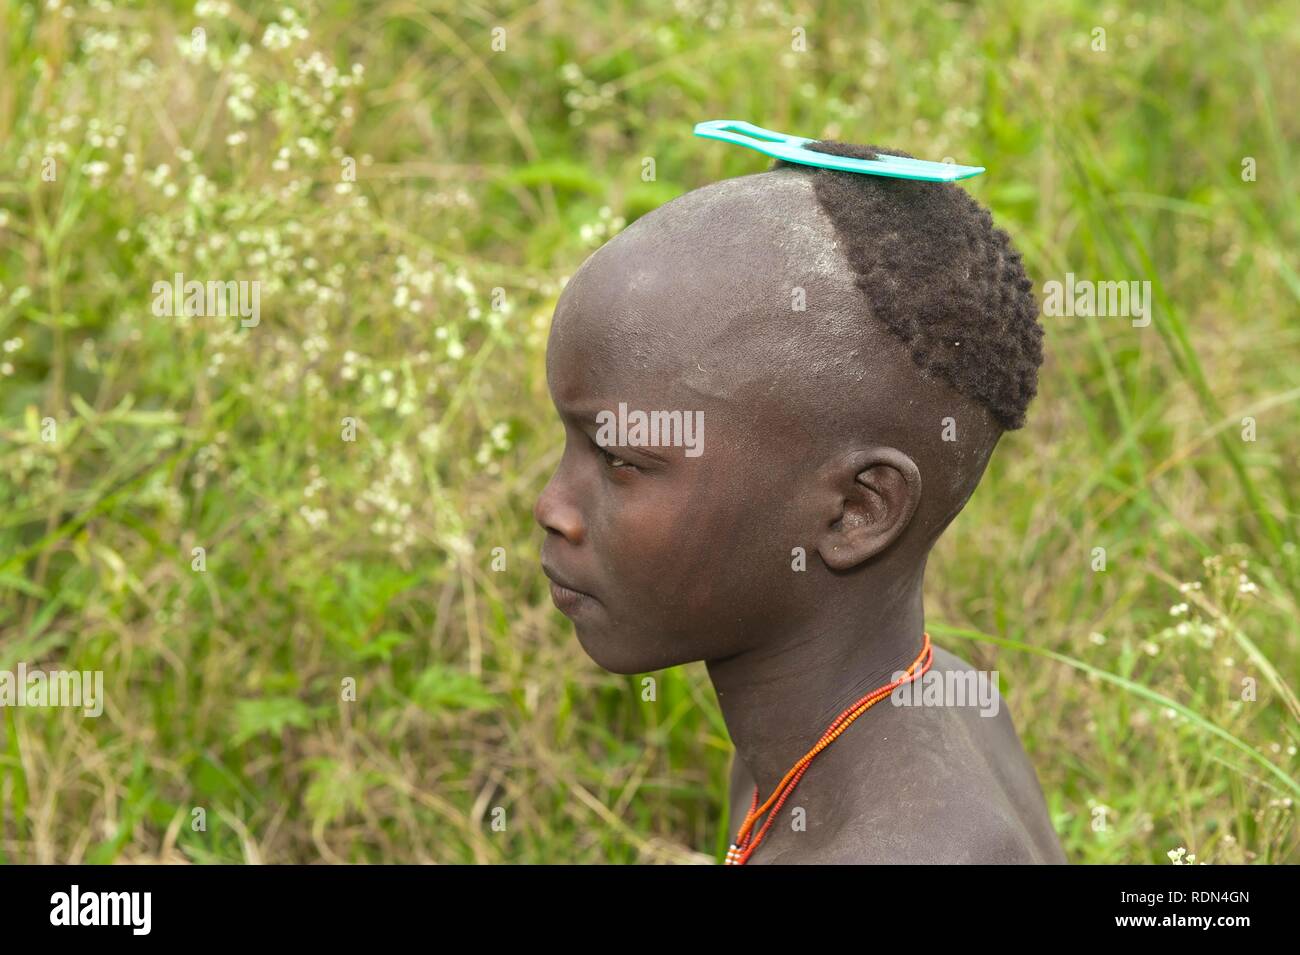 Surma boy with a comb in his hair, Tulgit, Omo River Valley, Ethiopia, Africa Stock Photo